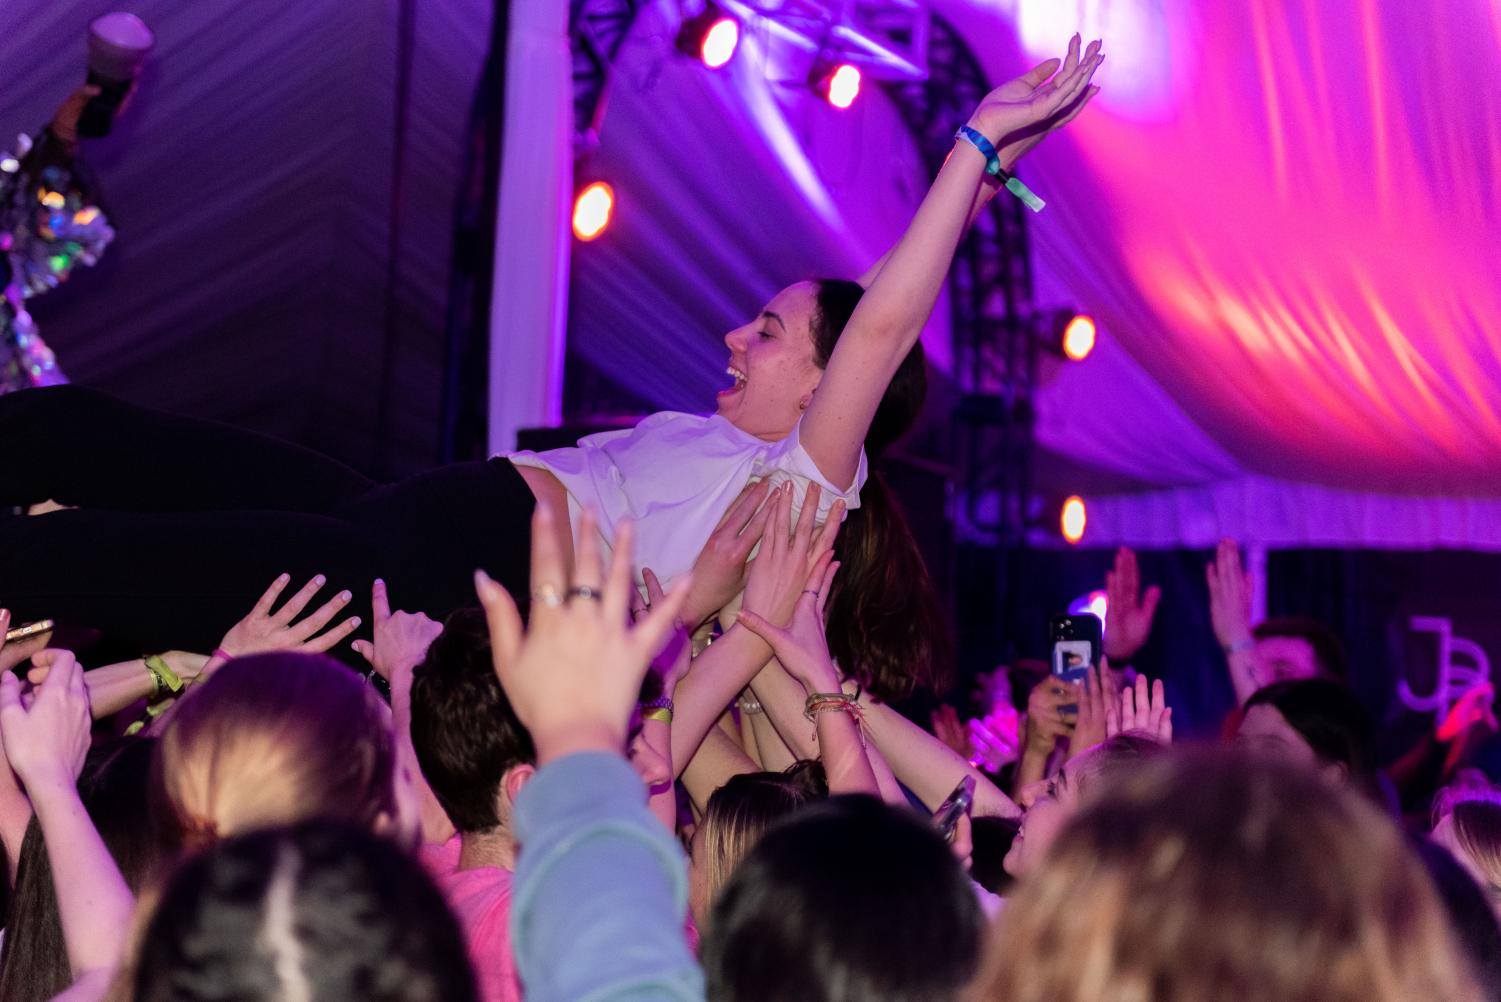 Girl+crowd-surfing+in+a+tent.